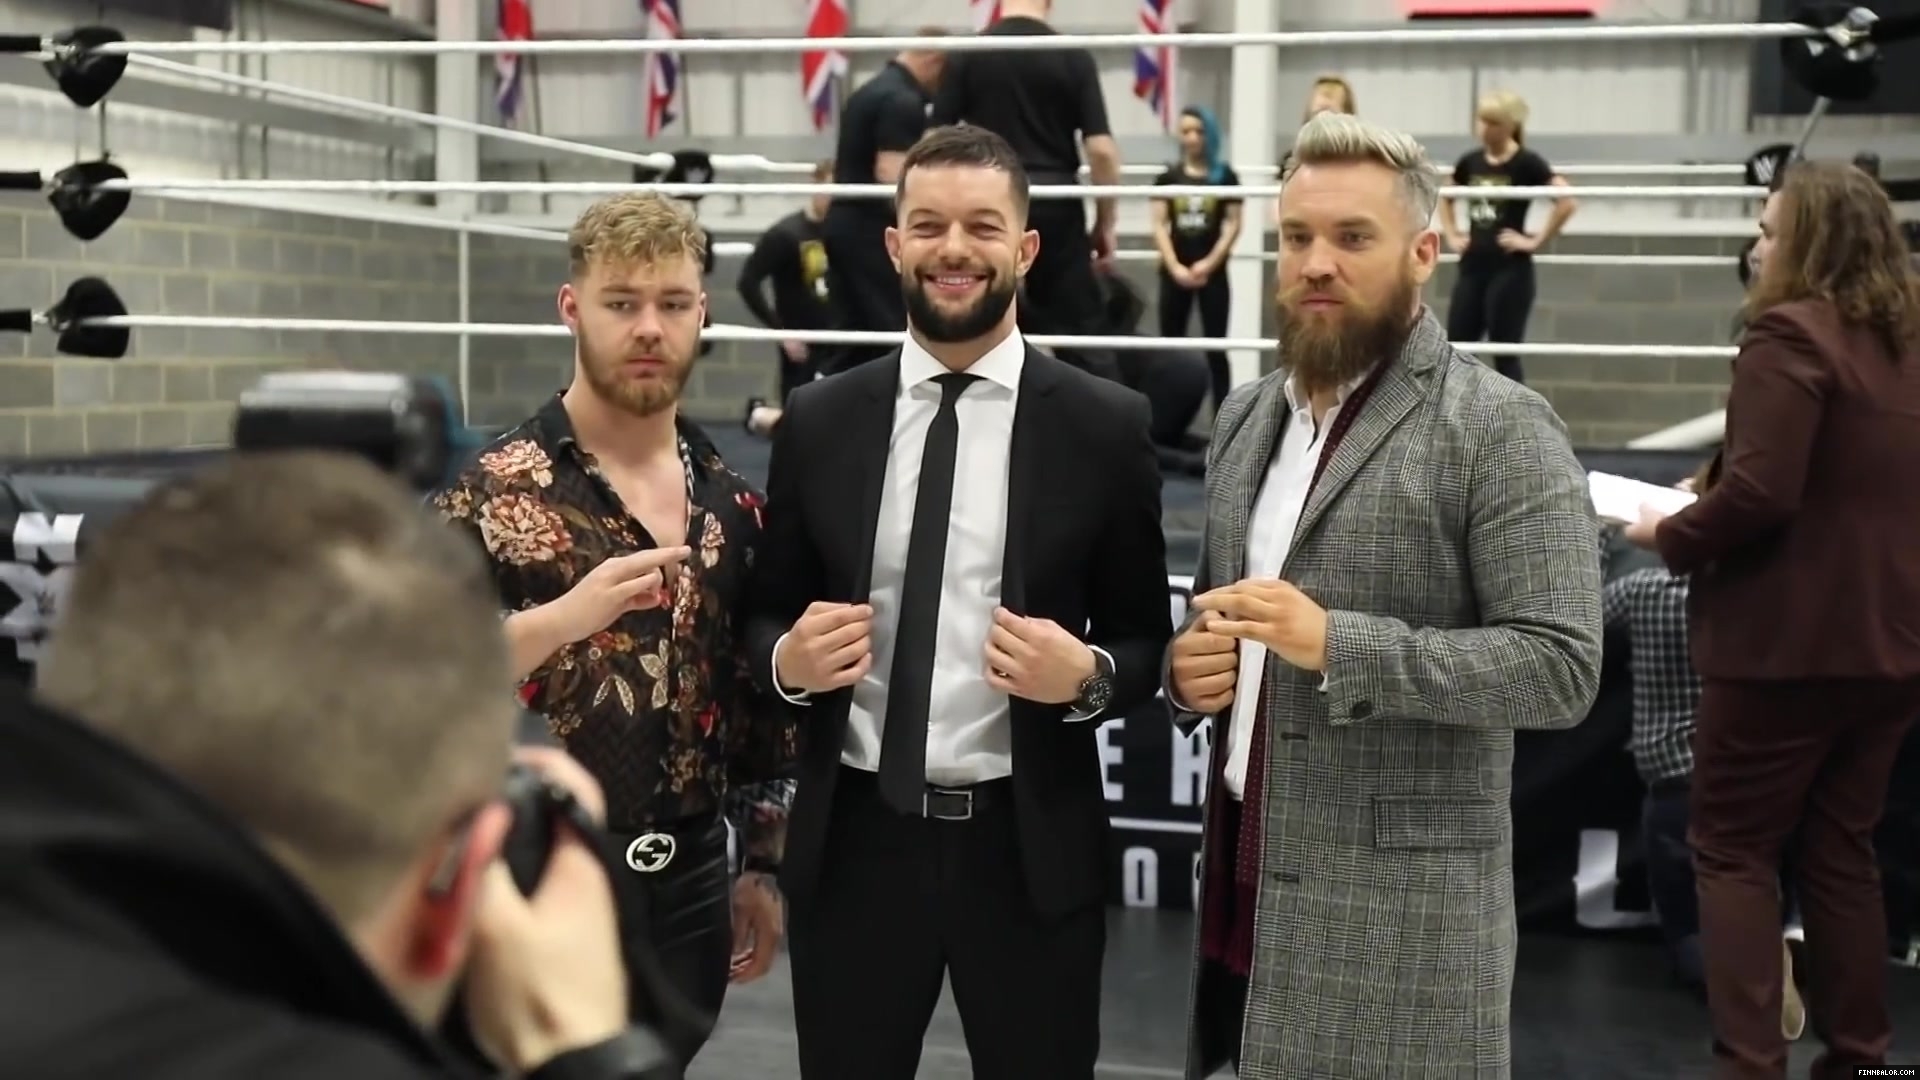 WWE_Superstar_FINN_BALOR_joins_MOUSTACHE_MOUNTAIN_at_the_opening_of_the_NXT_UK_PC_038.jpg